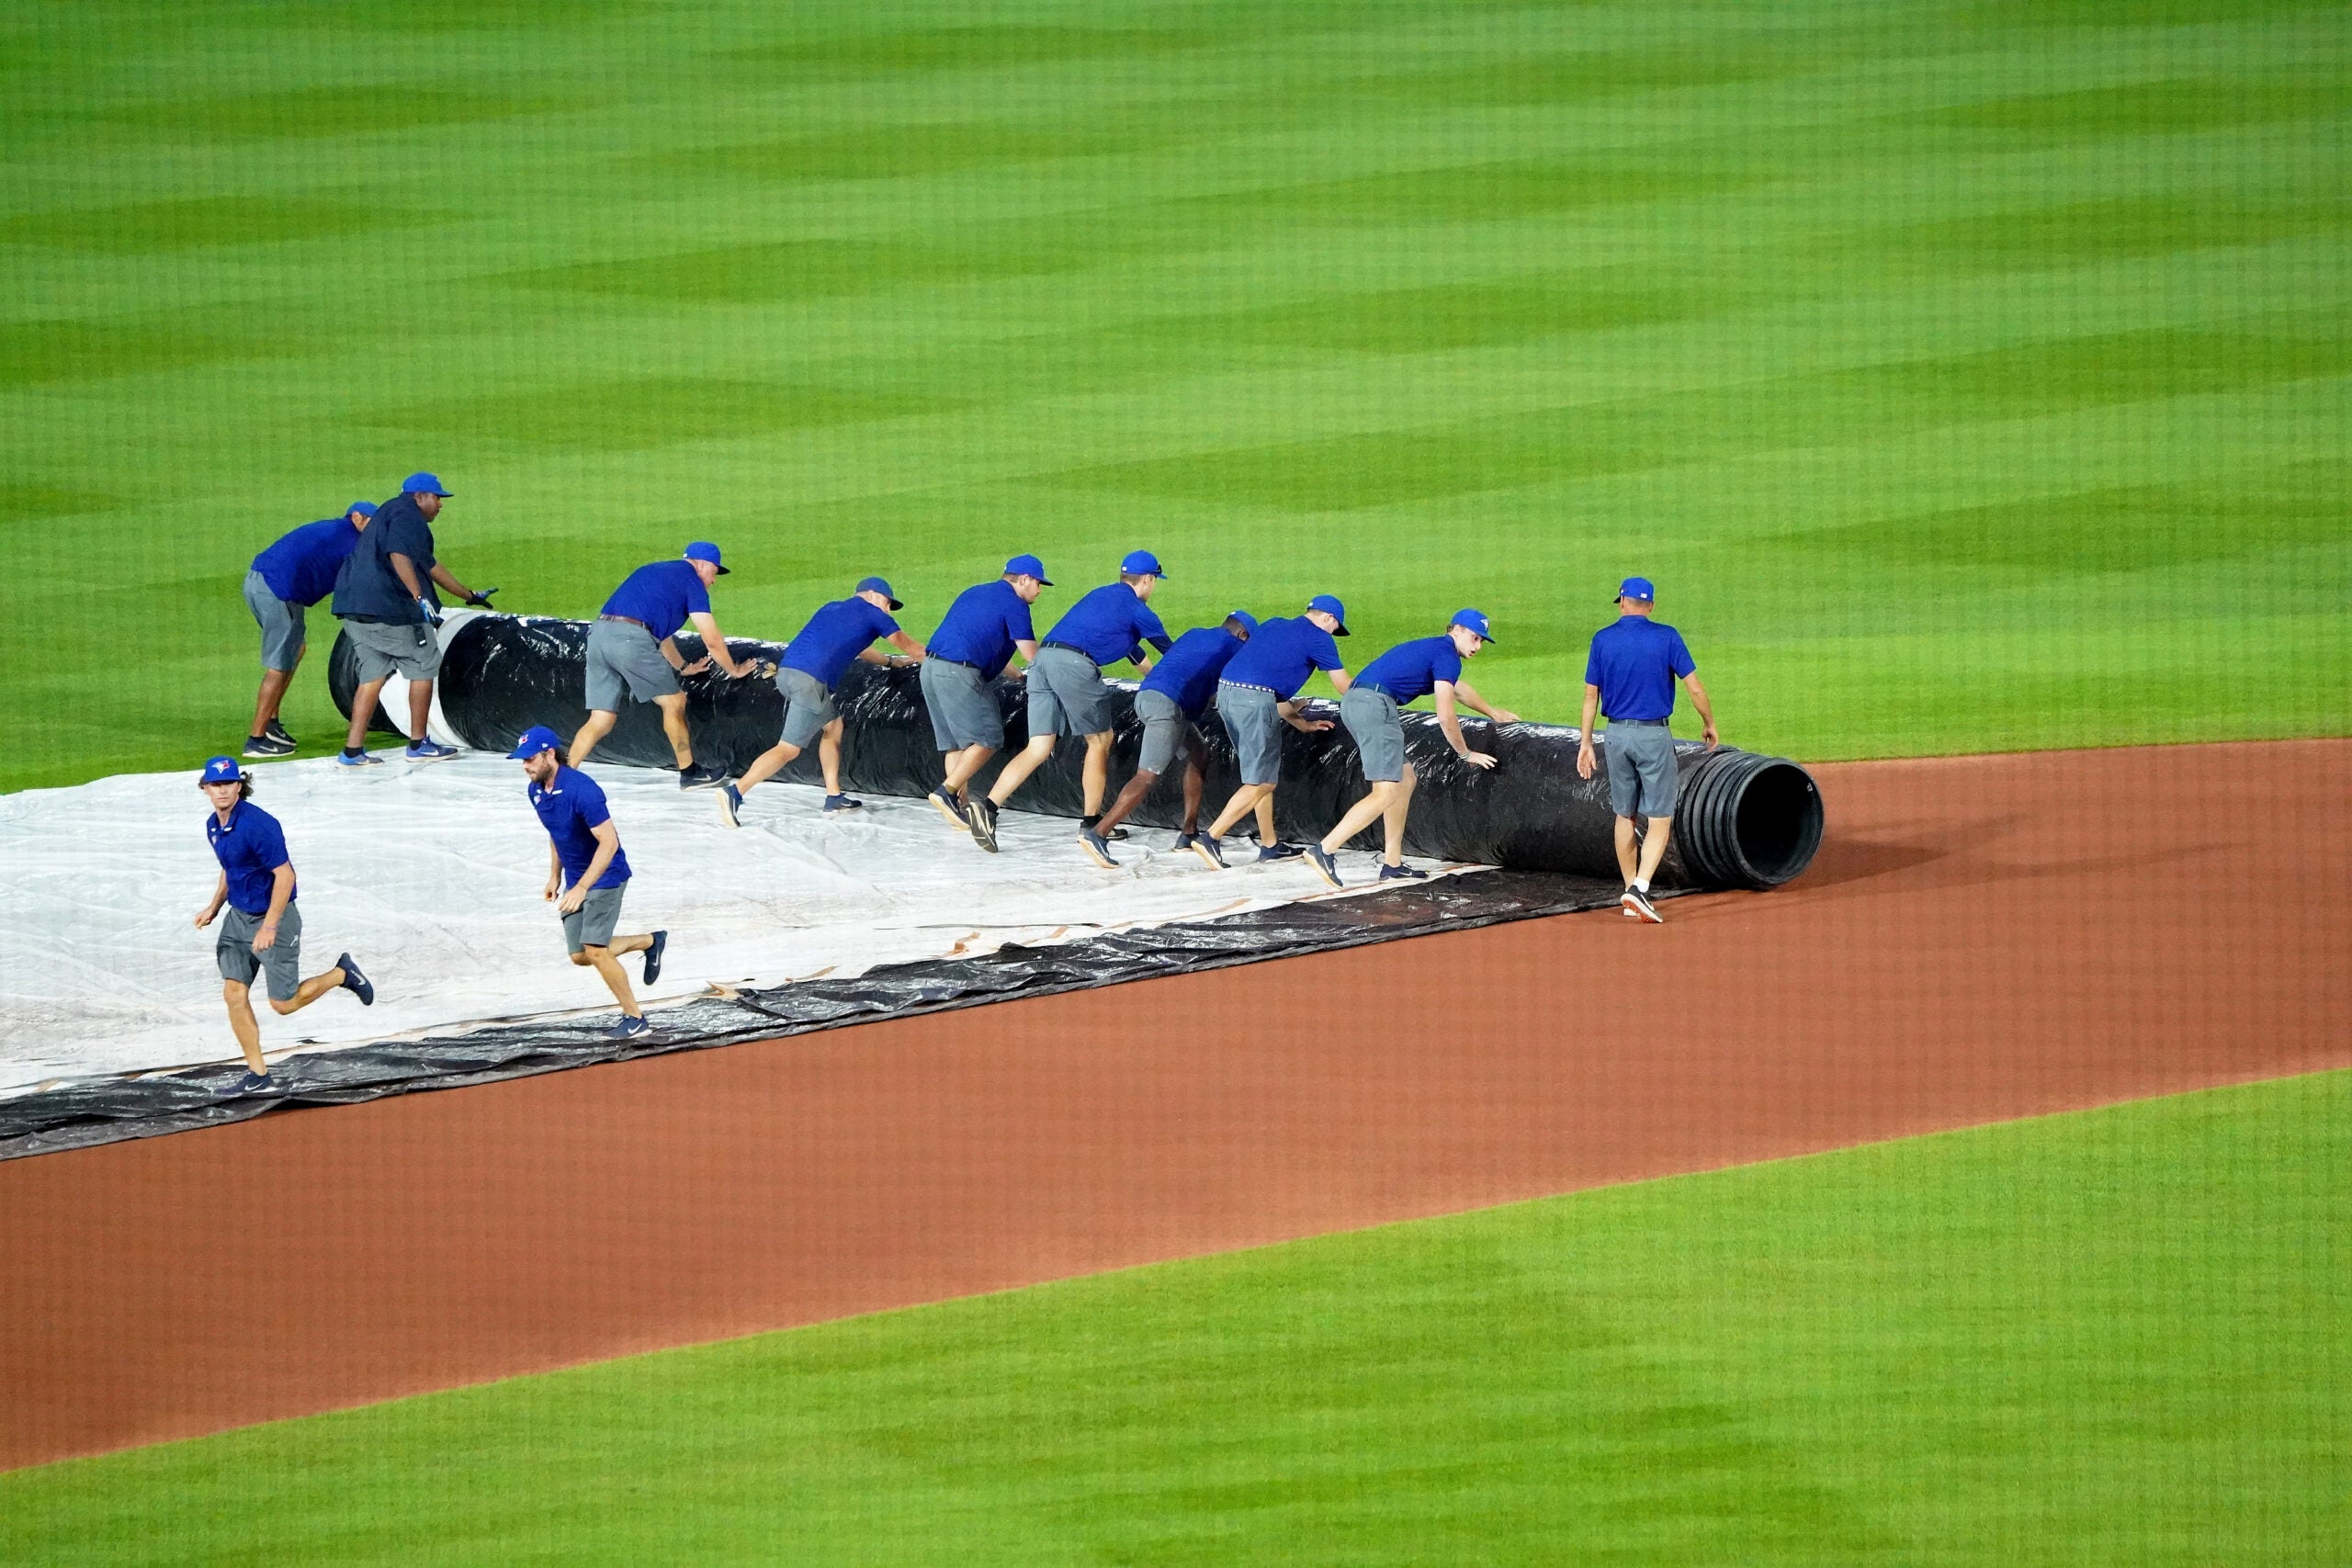 White Sox-Blue Jays rained out; doubleheader Thursday